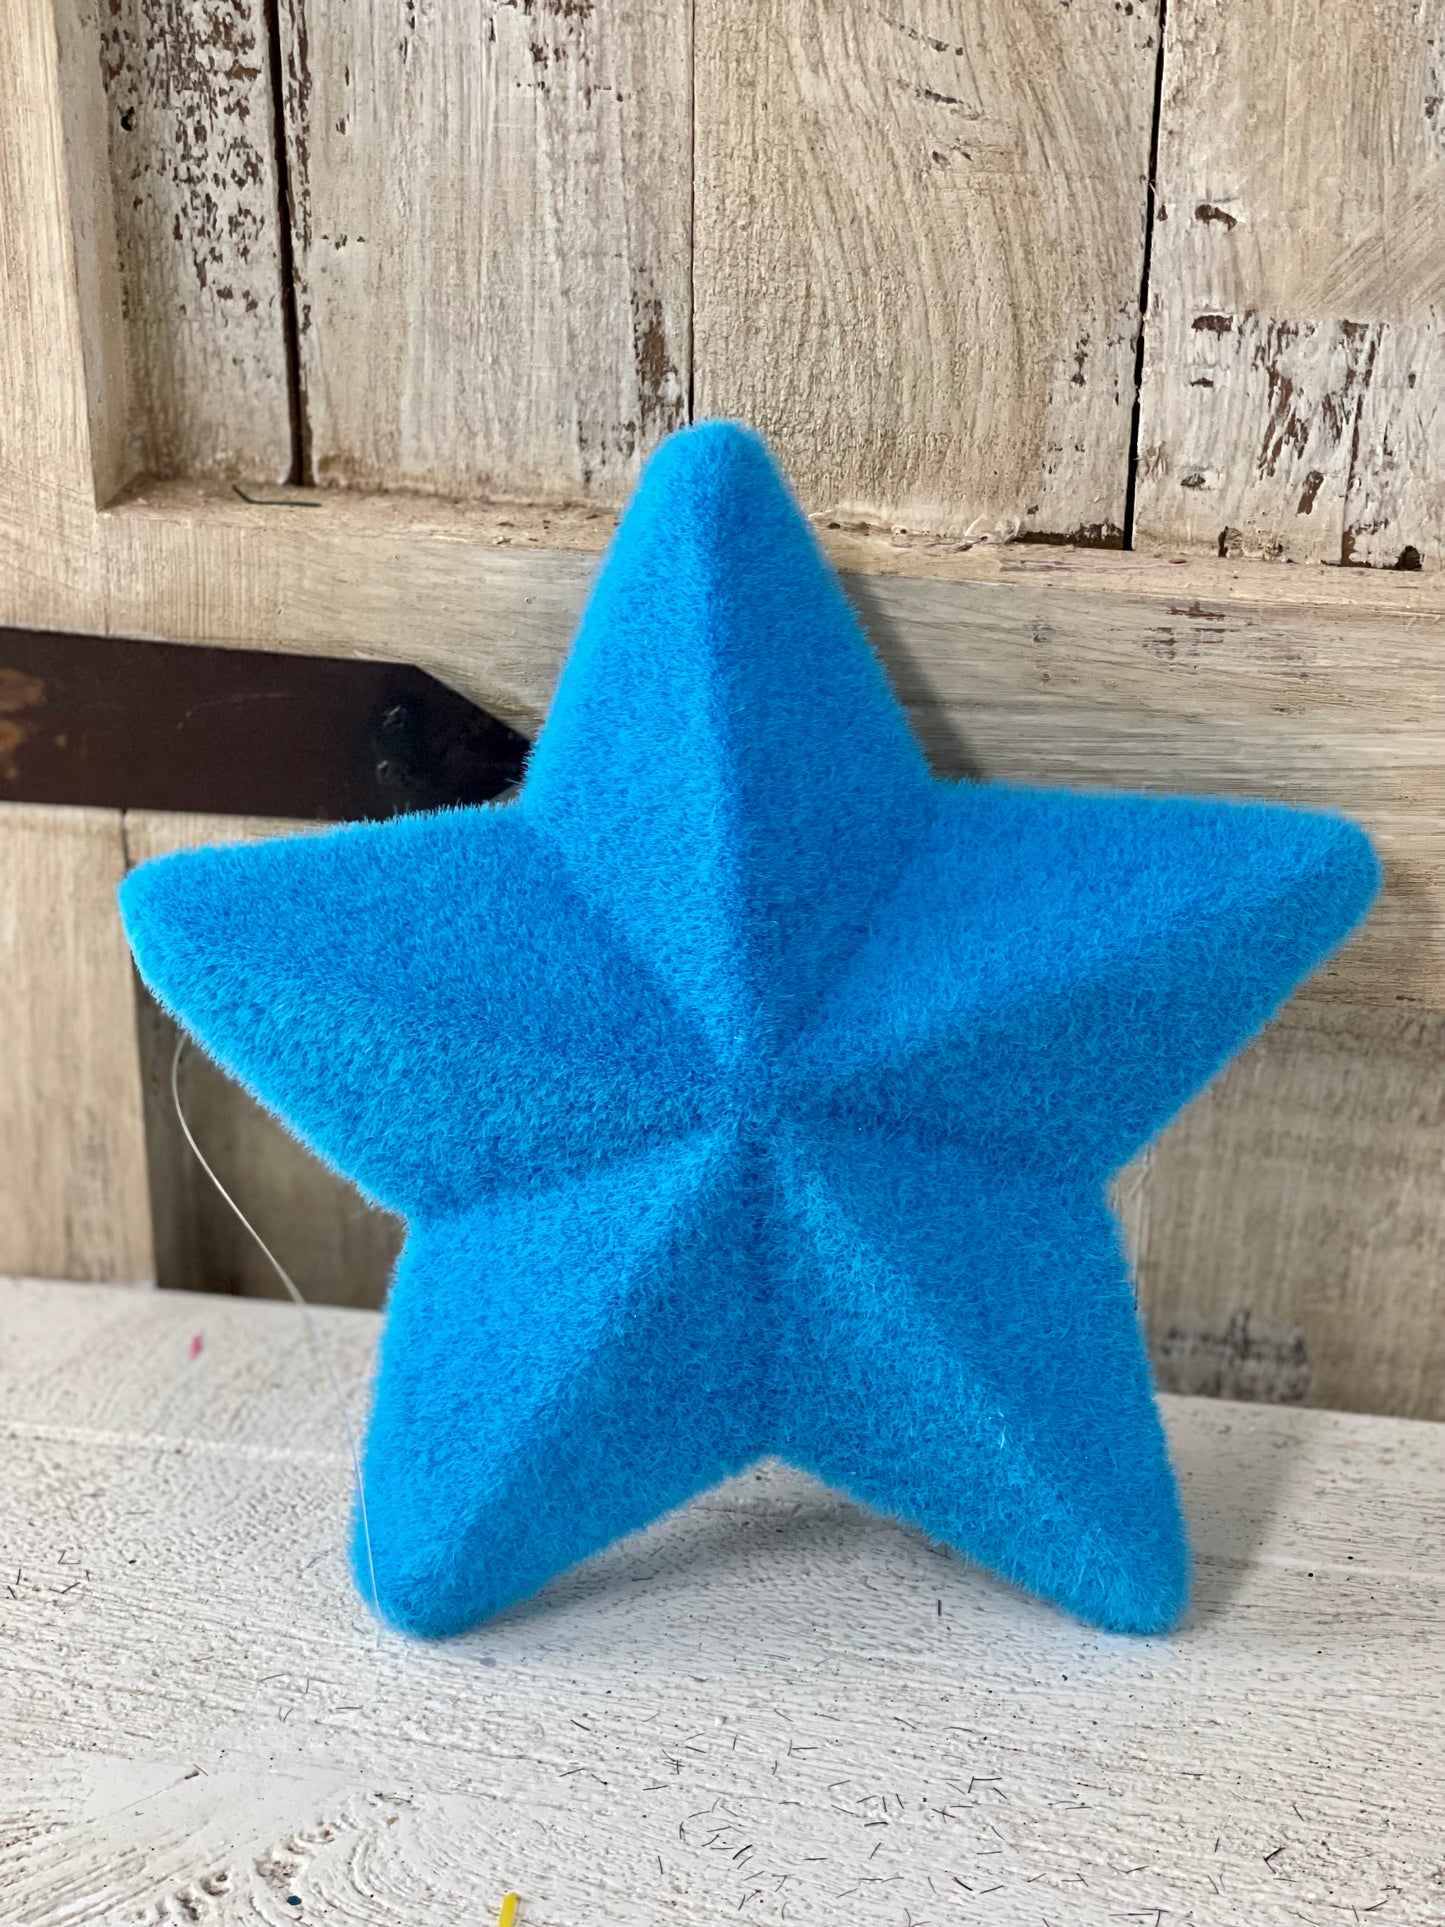 Flocked And Glittered Pointed Star 4 Assorted Colors